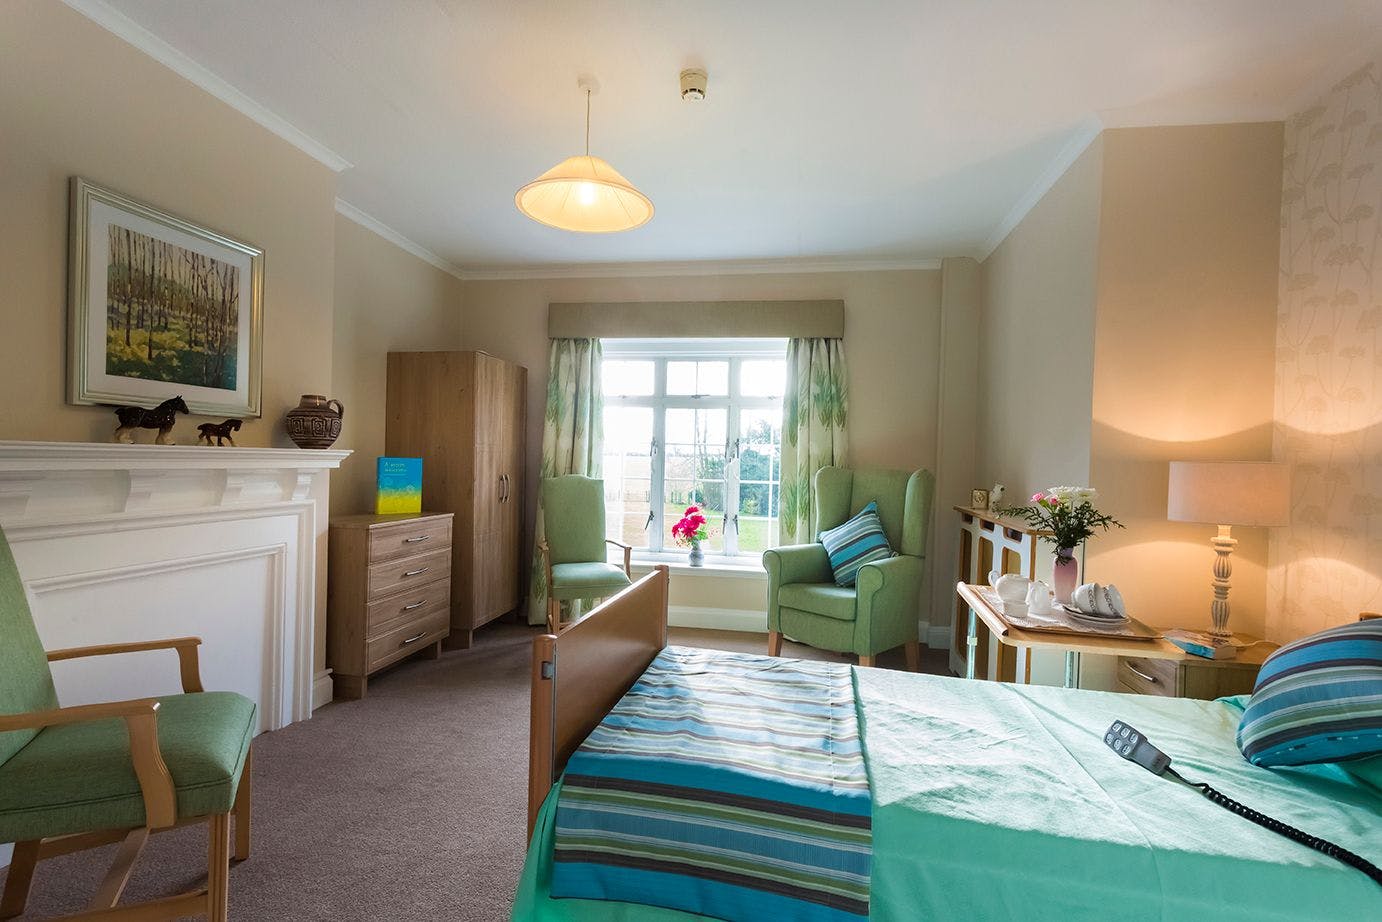 Brighterkind - Hungerford care home 2